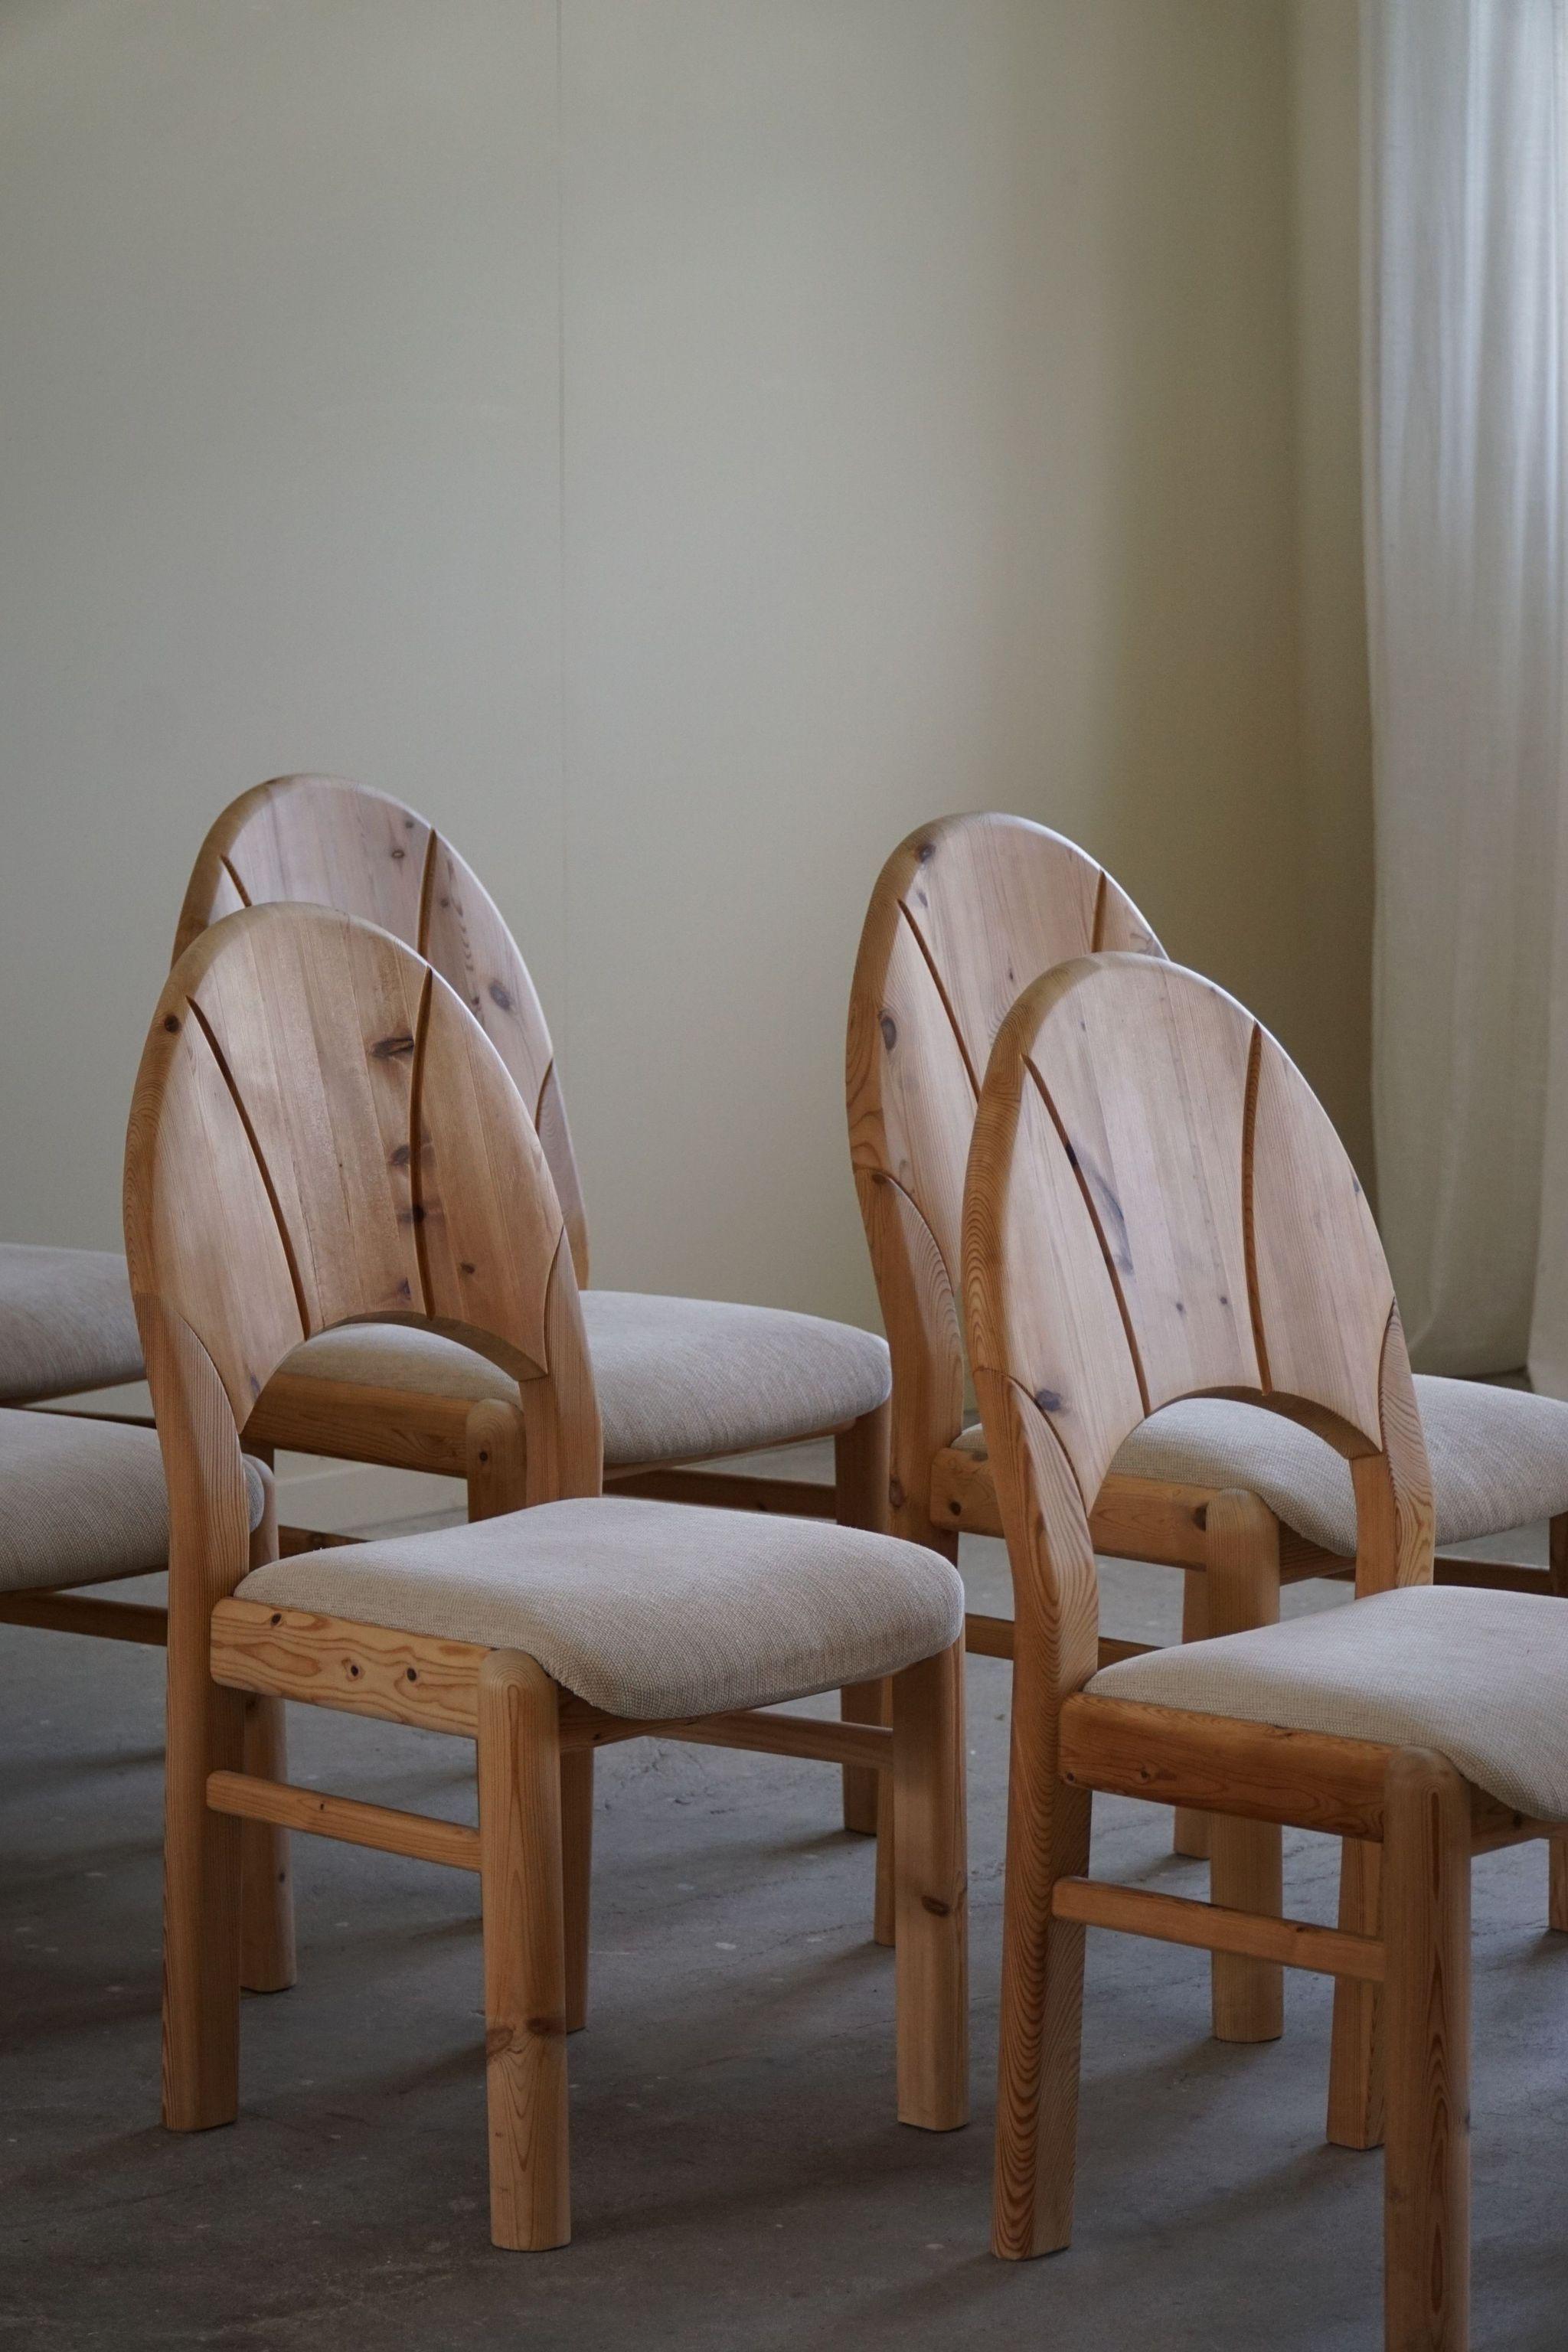 Set of 8 Sculptural Danish Modern Brutalist Chairs in Pine & Wool, 1970s For Sale 10